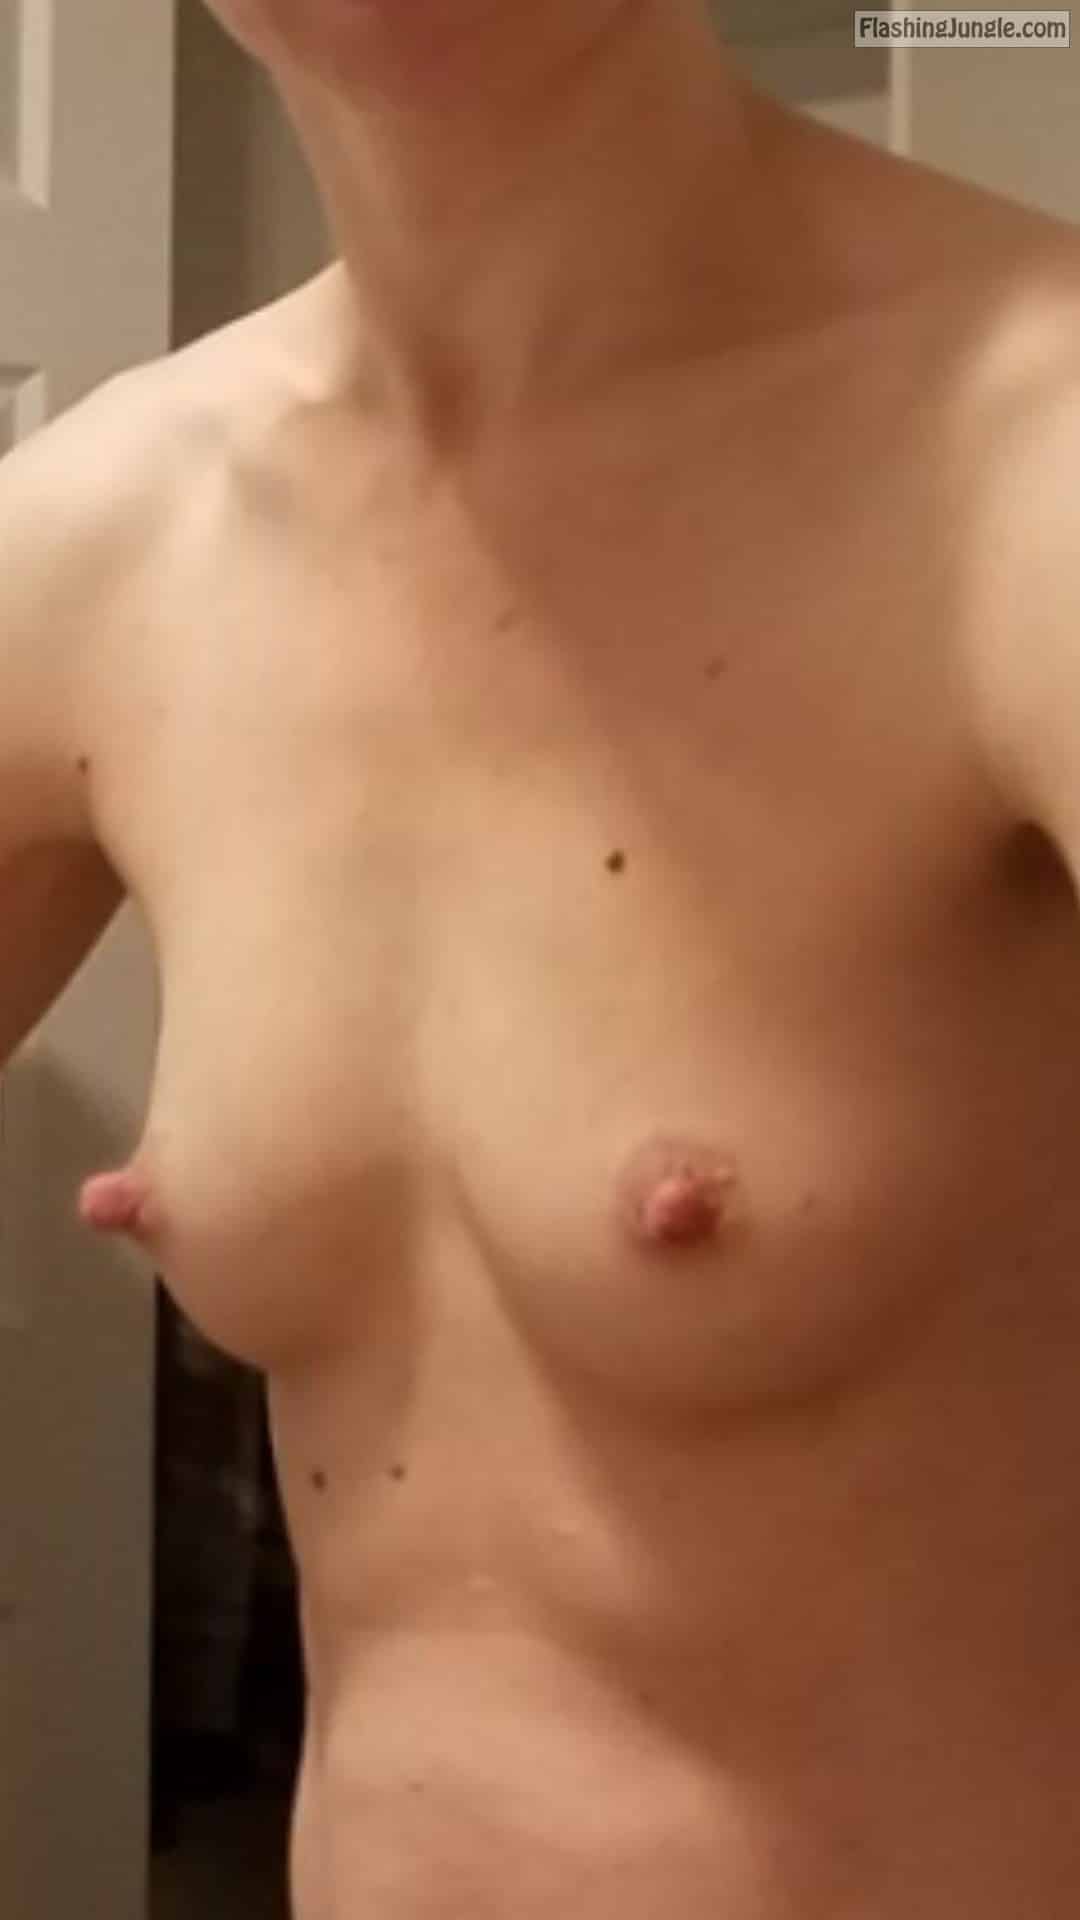 Boobs Flash Pics: Small tits hard erected nipples available for sucking